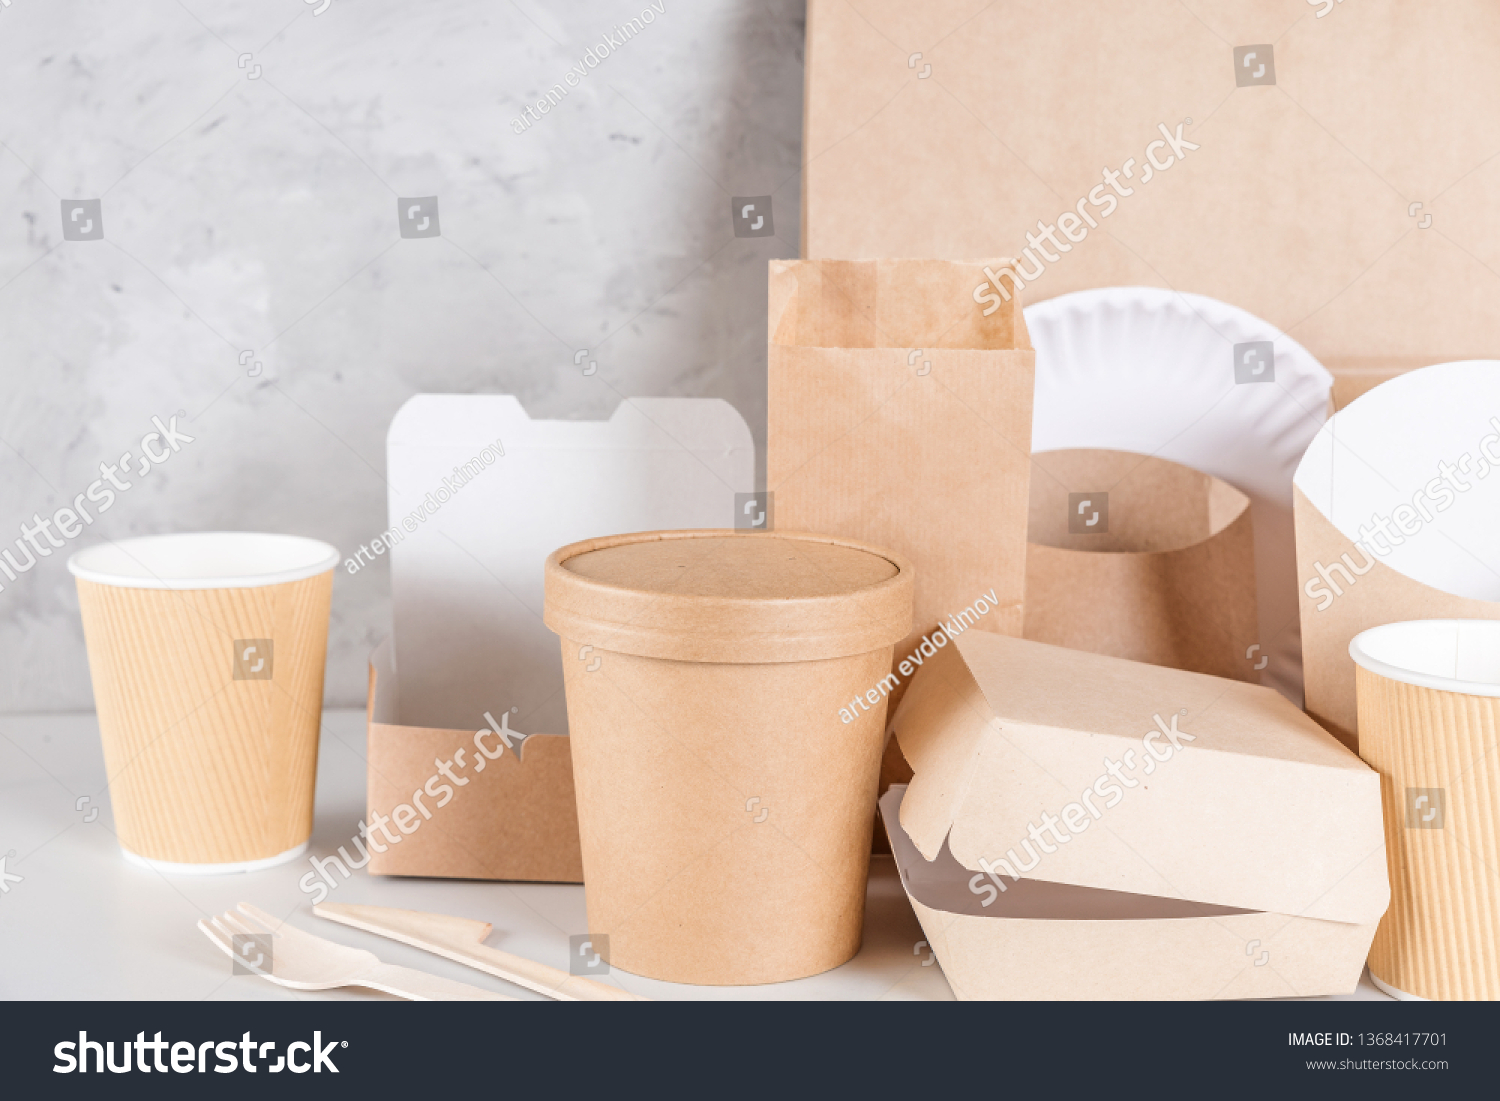 Eco friendly disposable tableware. Paper cups, dishes, bag, fast food containers and bamboo wooden cutlery. recycling concept #1368417701